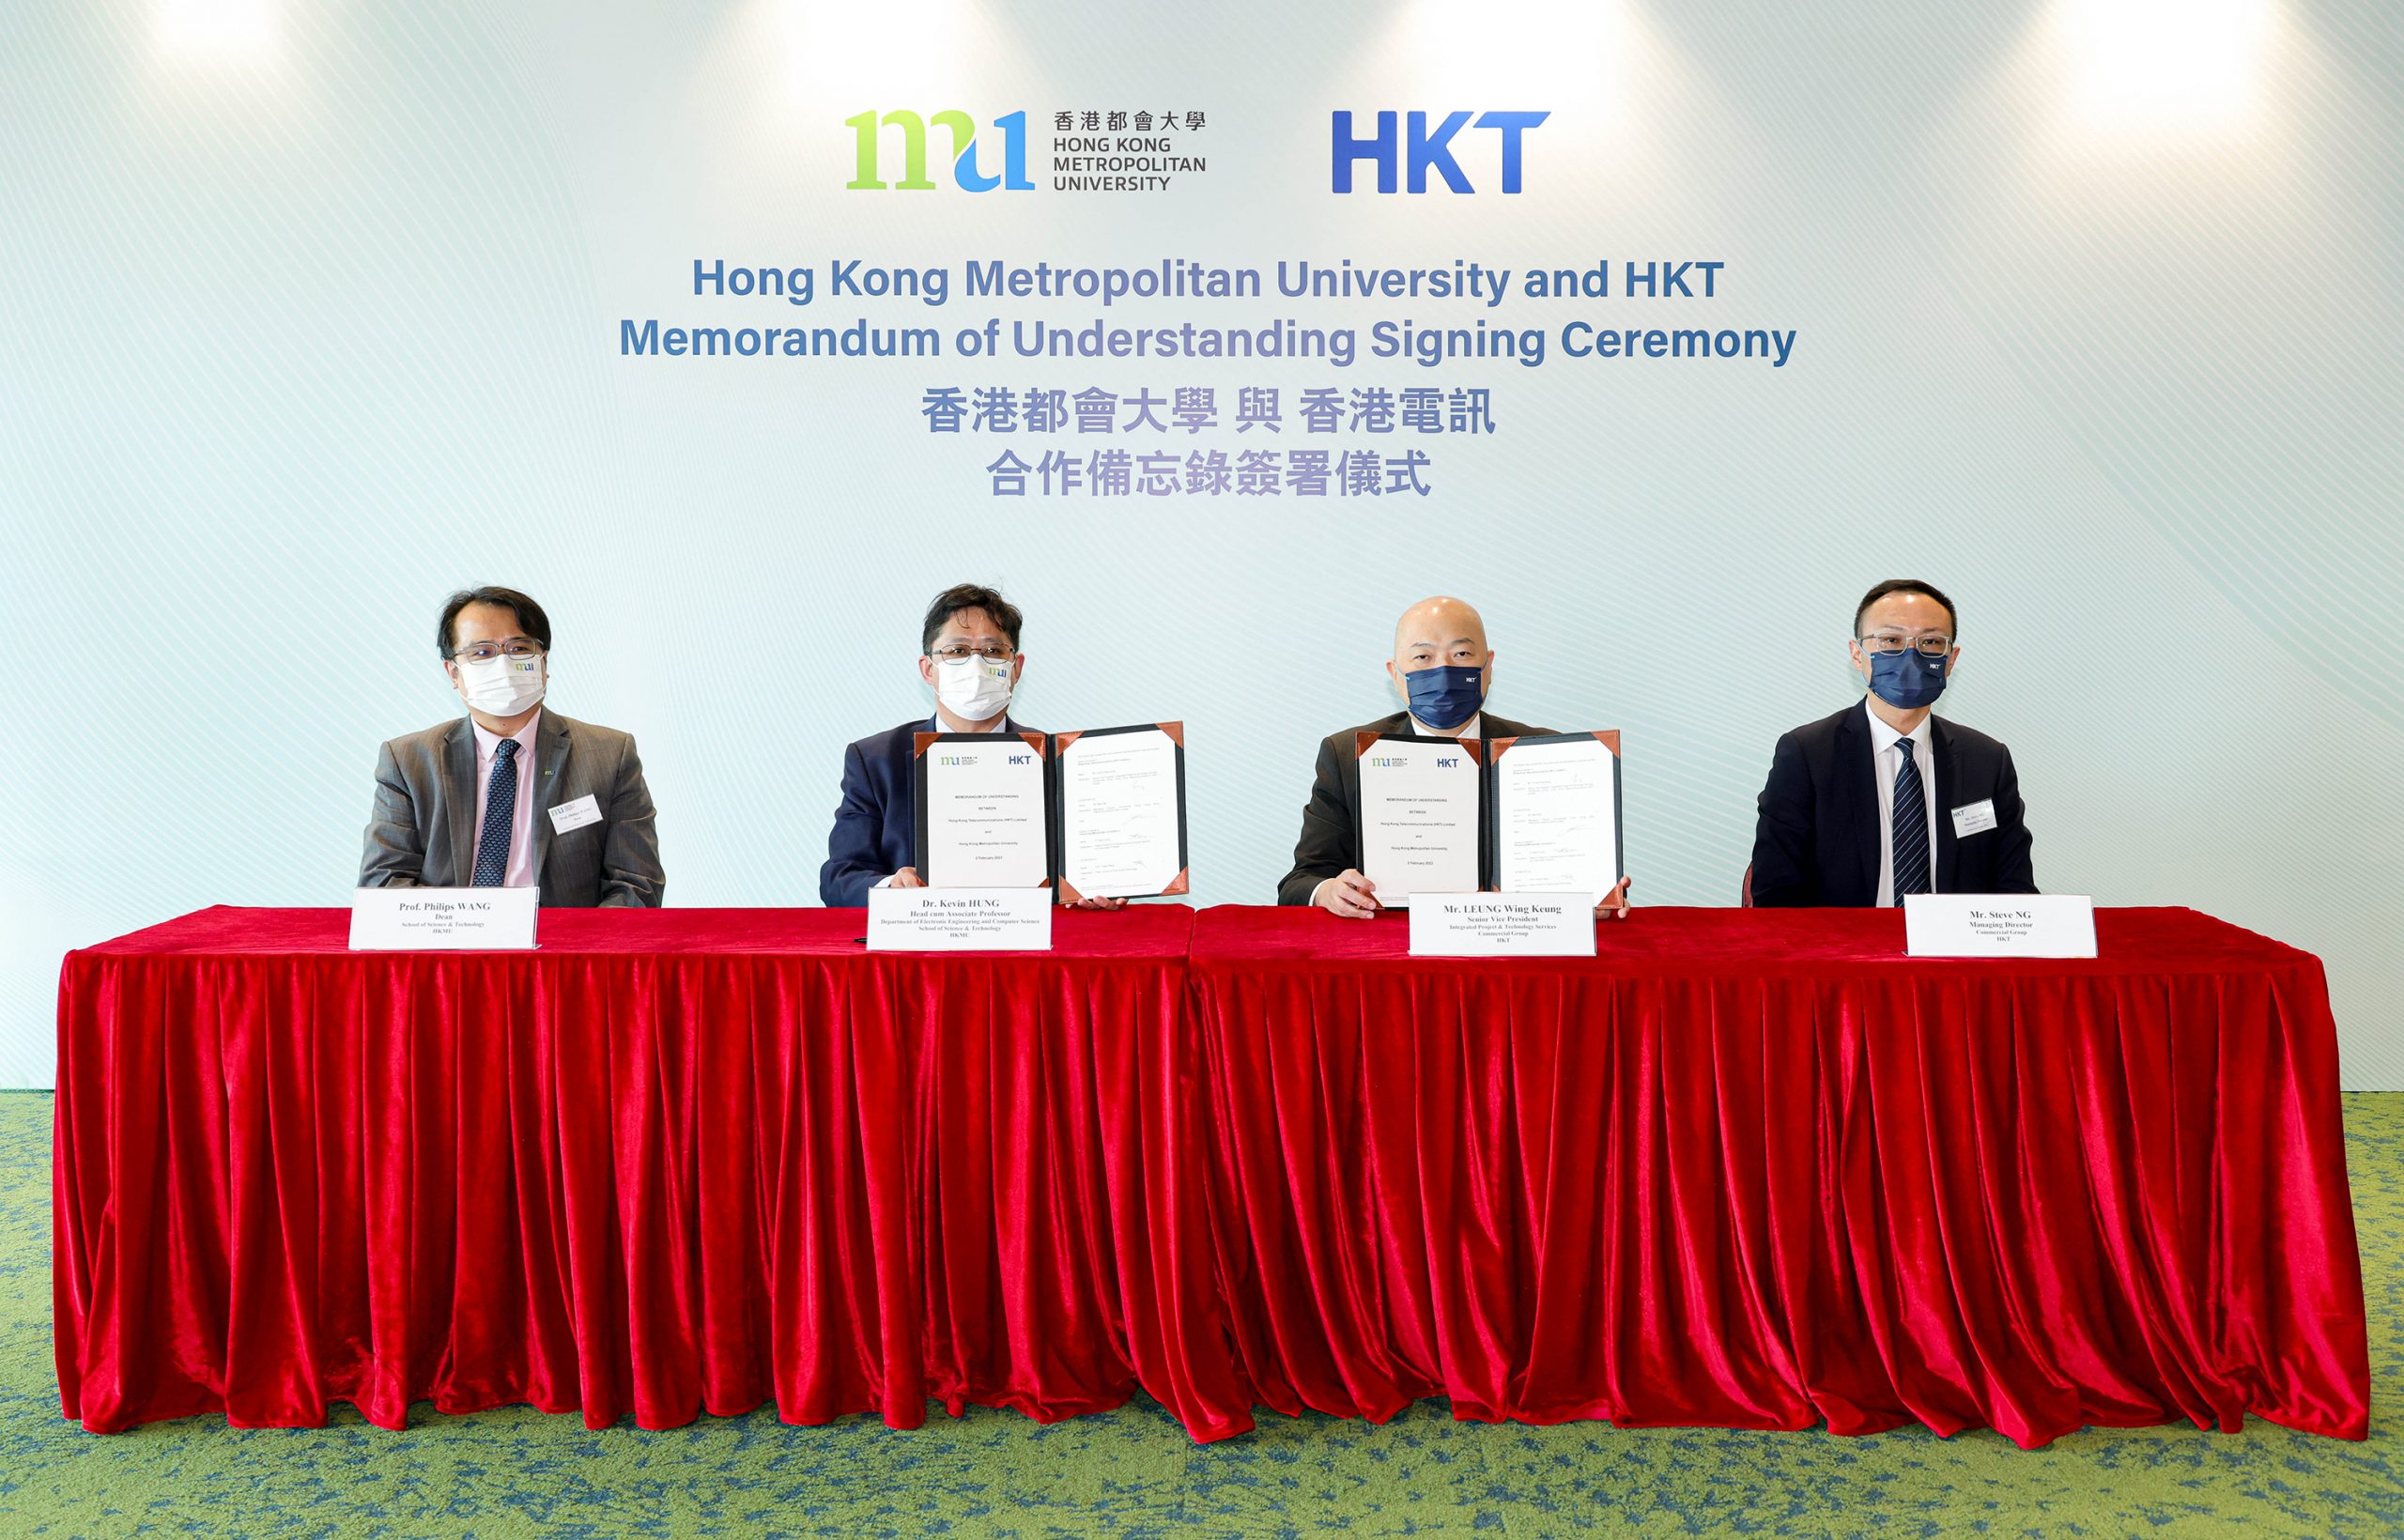 The MoU is signed by Dr Kevin Hung King-fai, Head of the Department of Electronic Engineering and Computer Science and Associate Professor of the School, and Mr Leung Wing-keung, Senior Vice President, Integrated Project & Technology Services, Commercial Group of HKT. The signing is also witnessed by Prof. Philips Wang Fu-lee, Dean of the School, and Mr Steve Ng, Managing Director, Commercial Group of HKT.